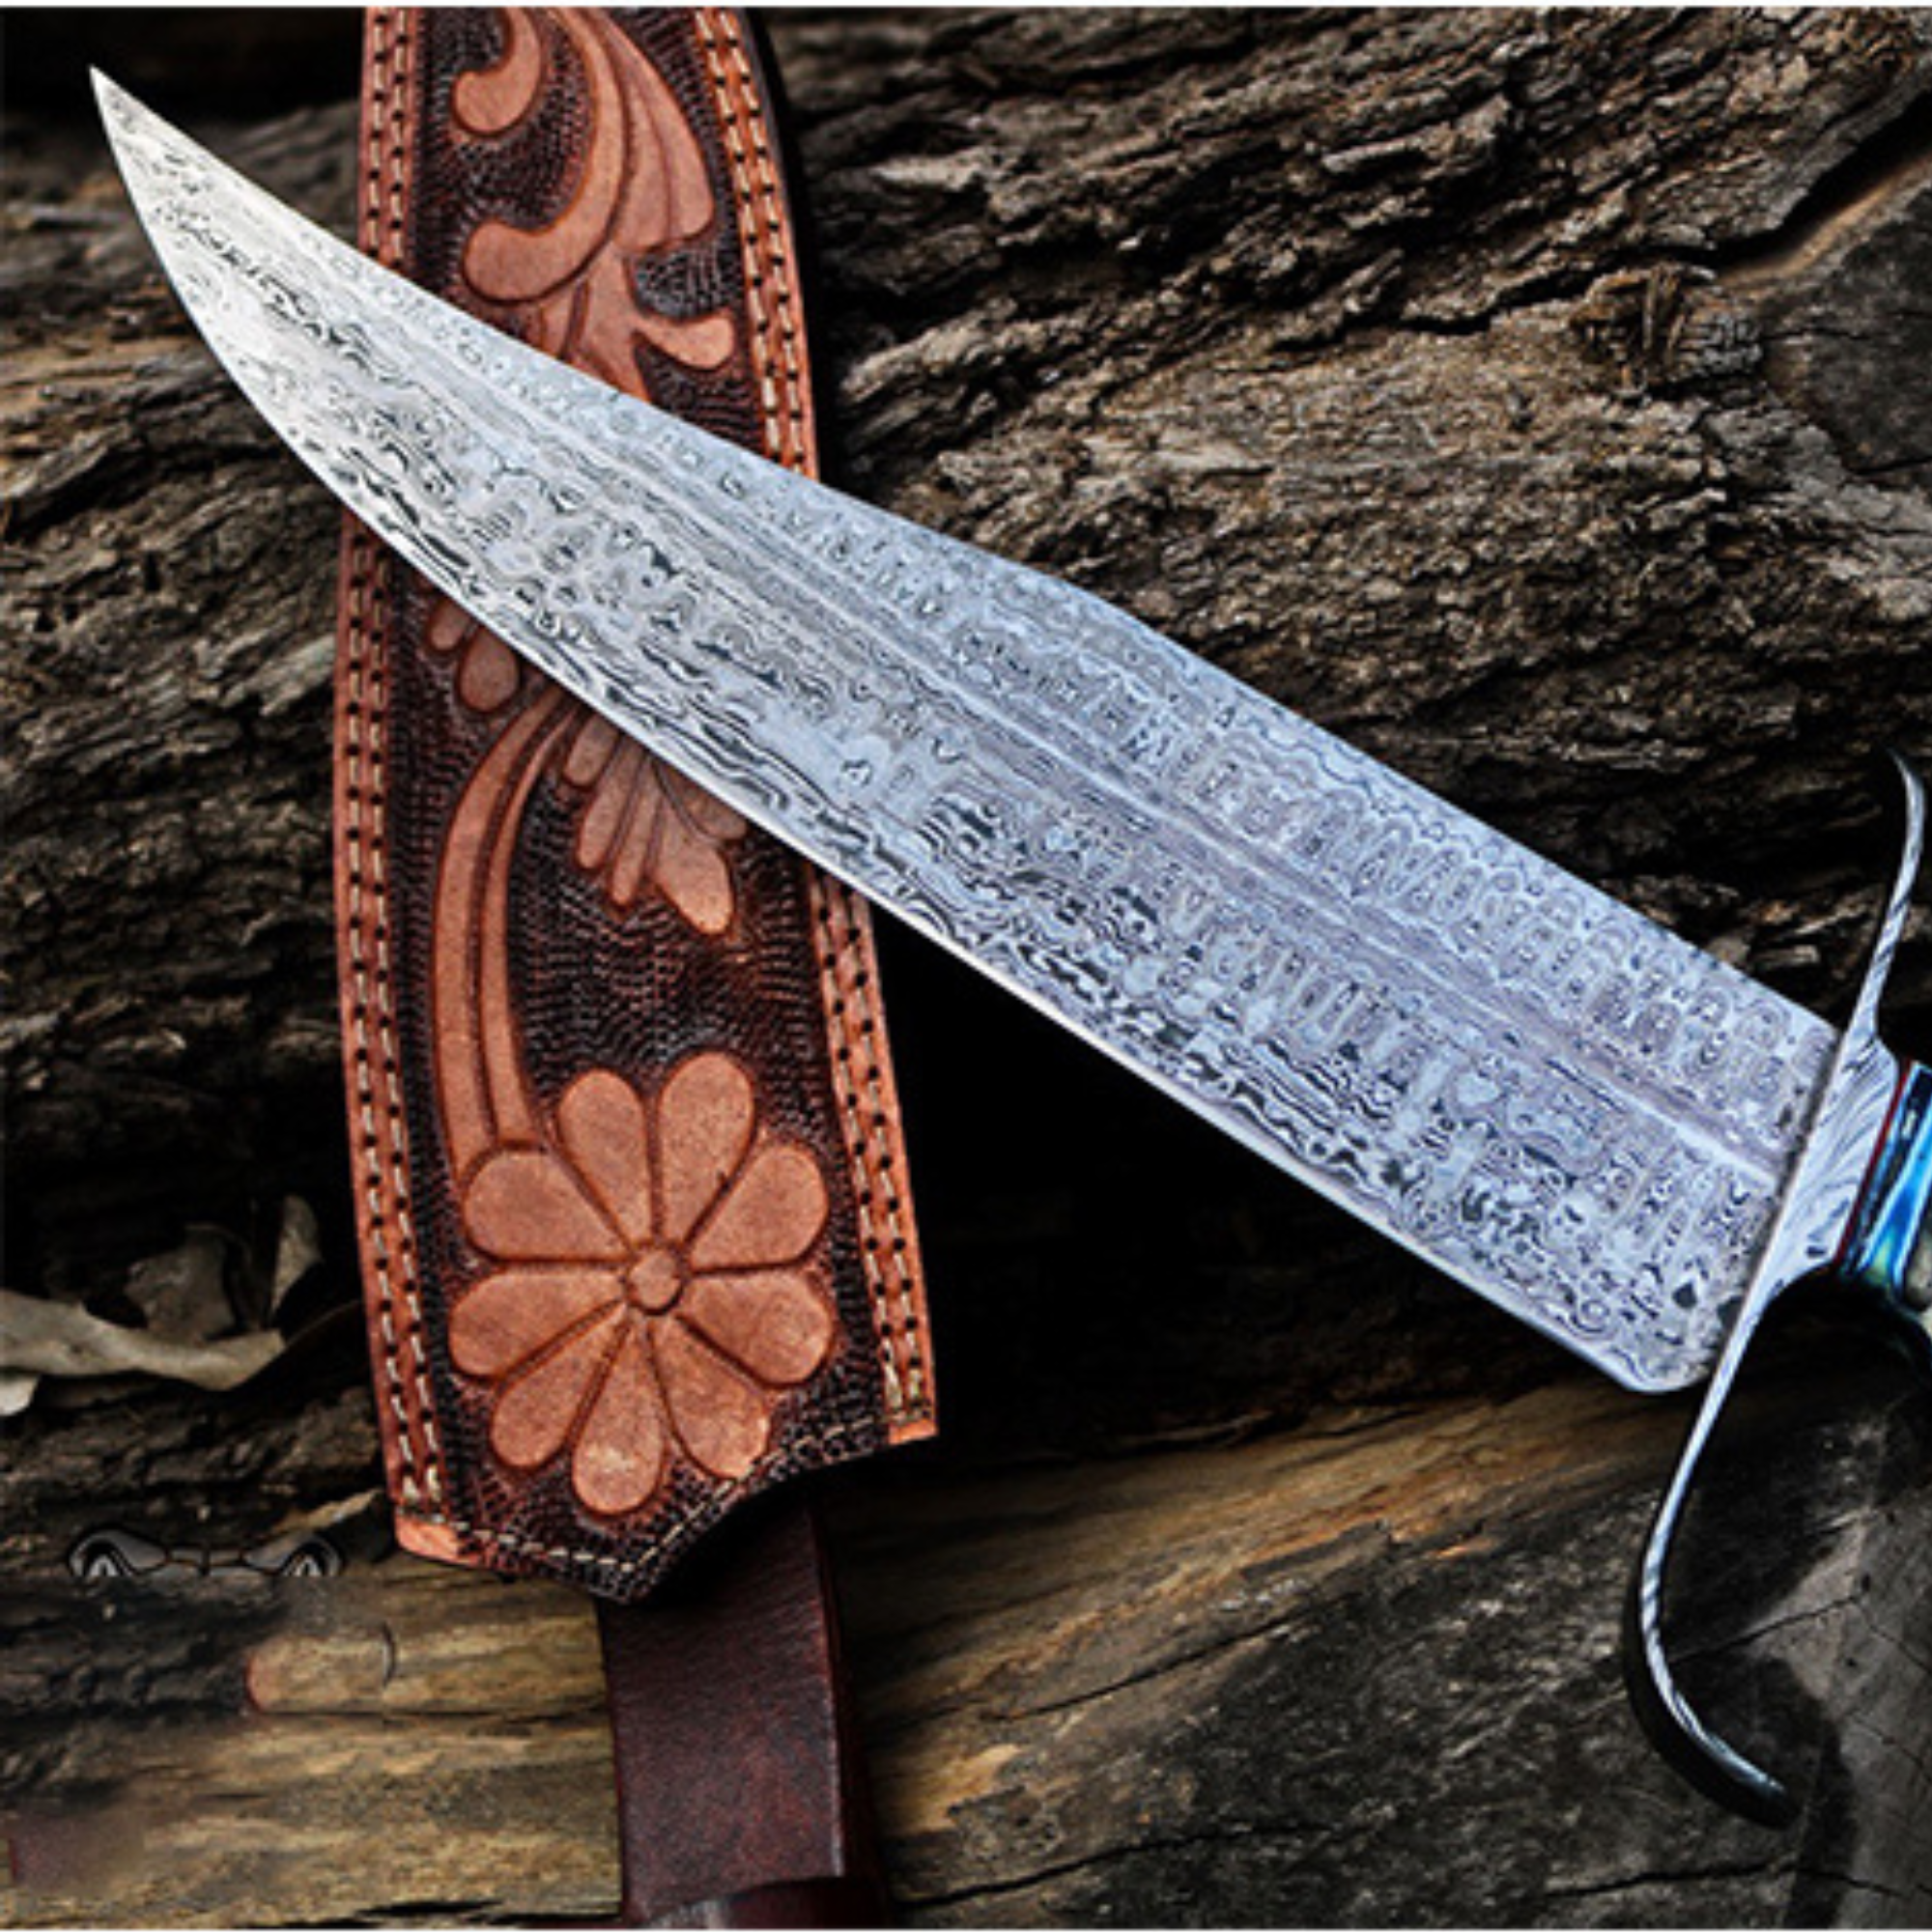 Azure Dragon Knife 16 Long 11 Blade 28 Ounce Hunting Fixed Blade Damascus Bowie Knife